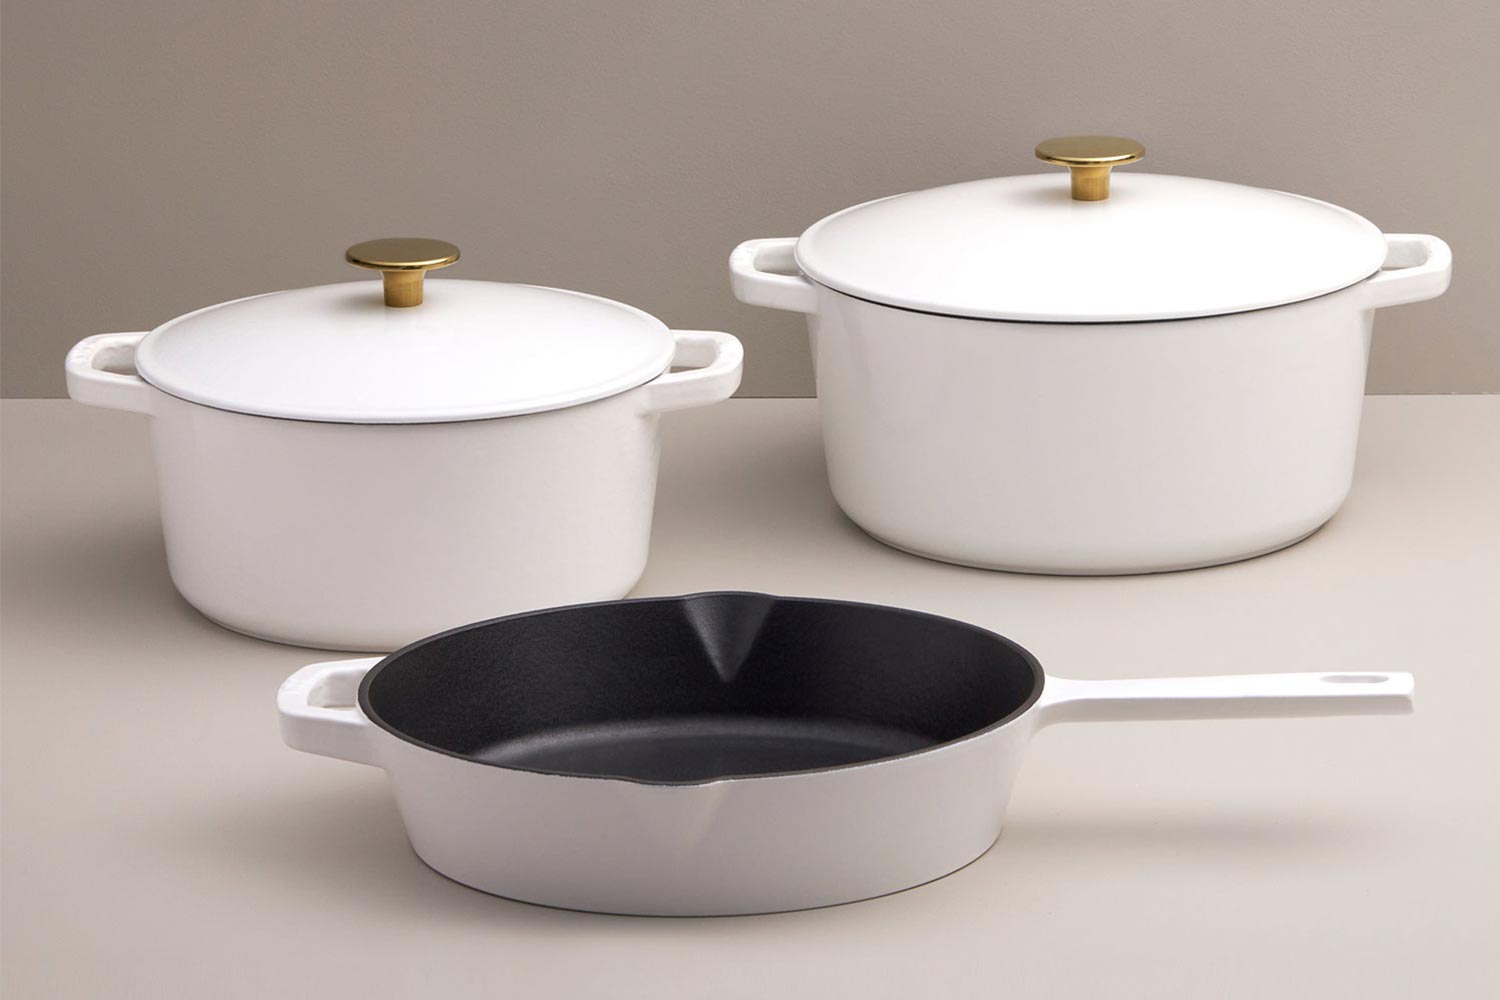 The 5-piece Milo cookware set with two Dutch ovens and a skillet